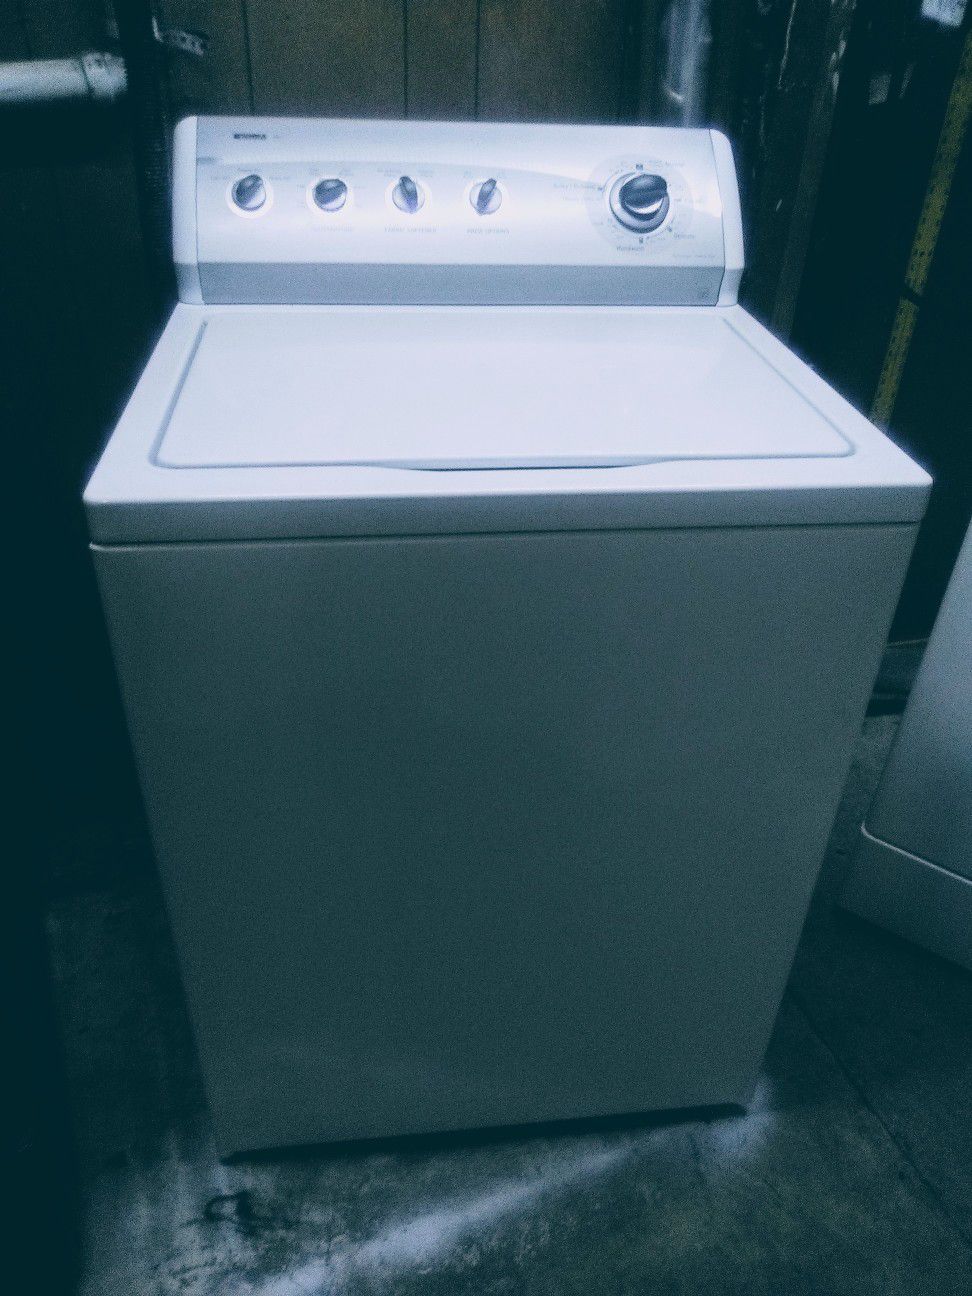 Kenmore 800 Washer